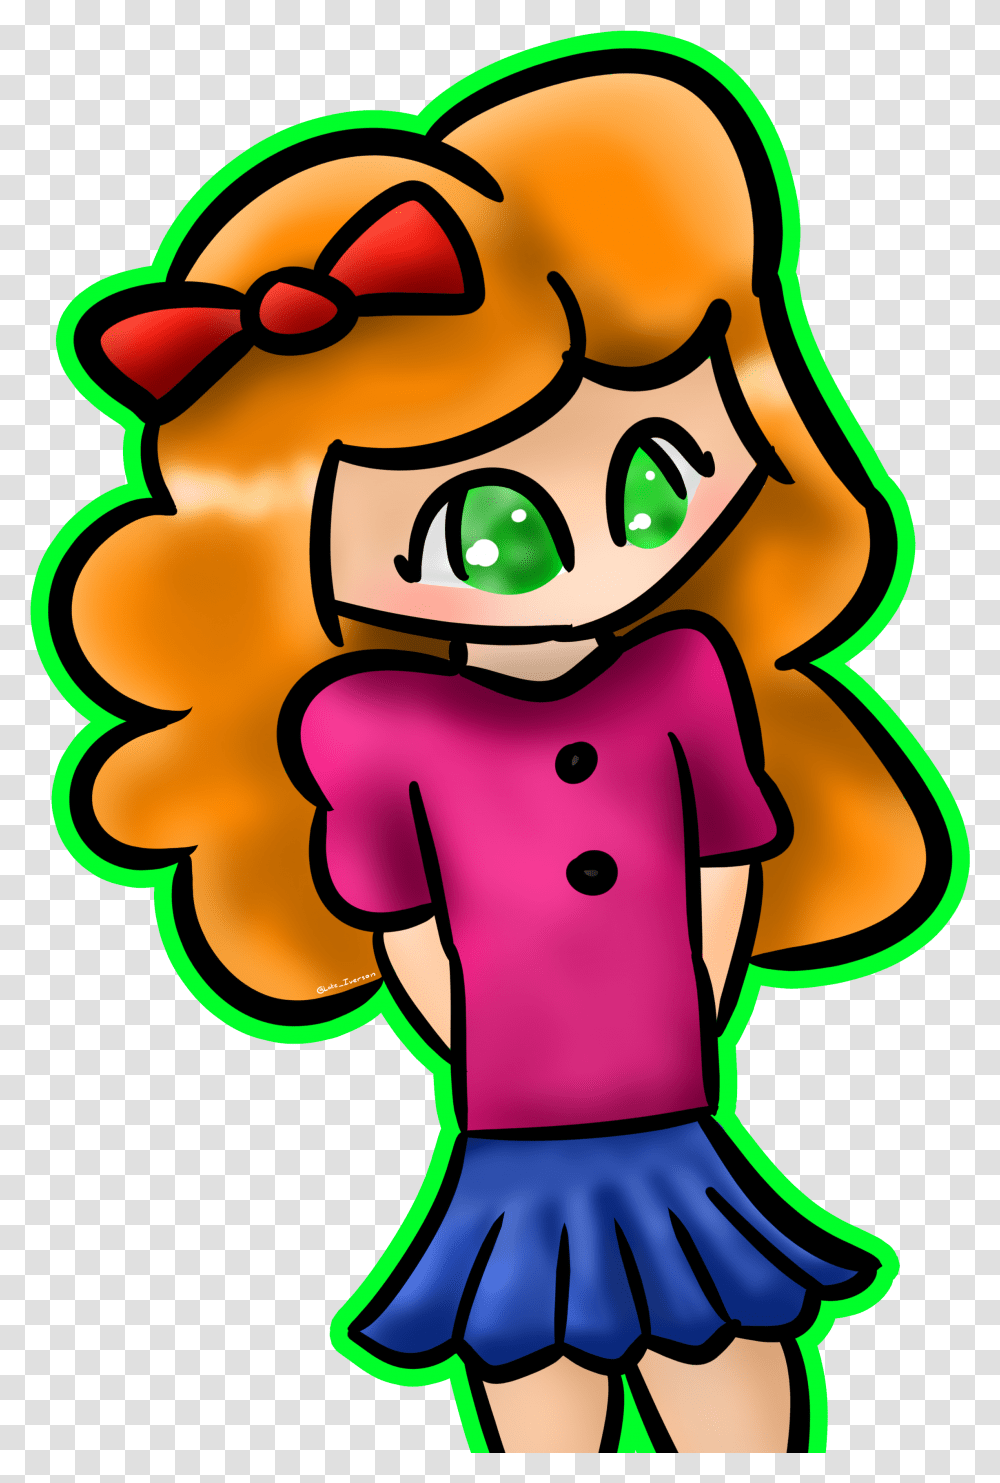 Five Nights At Freddy S Sister Location Elizabeth From Five Nights At Freddys, Sweets, Food, Confectionery Transparent Png